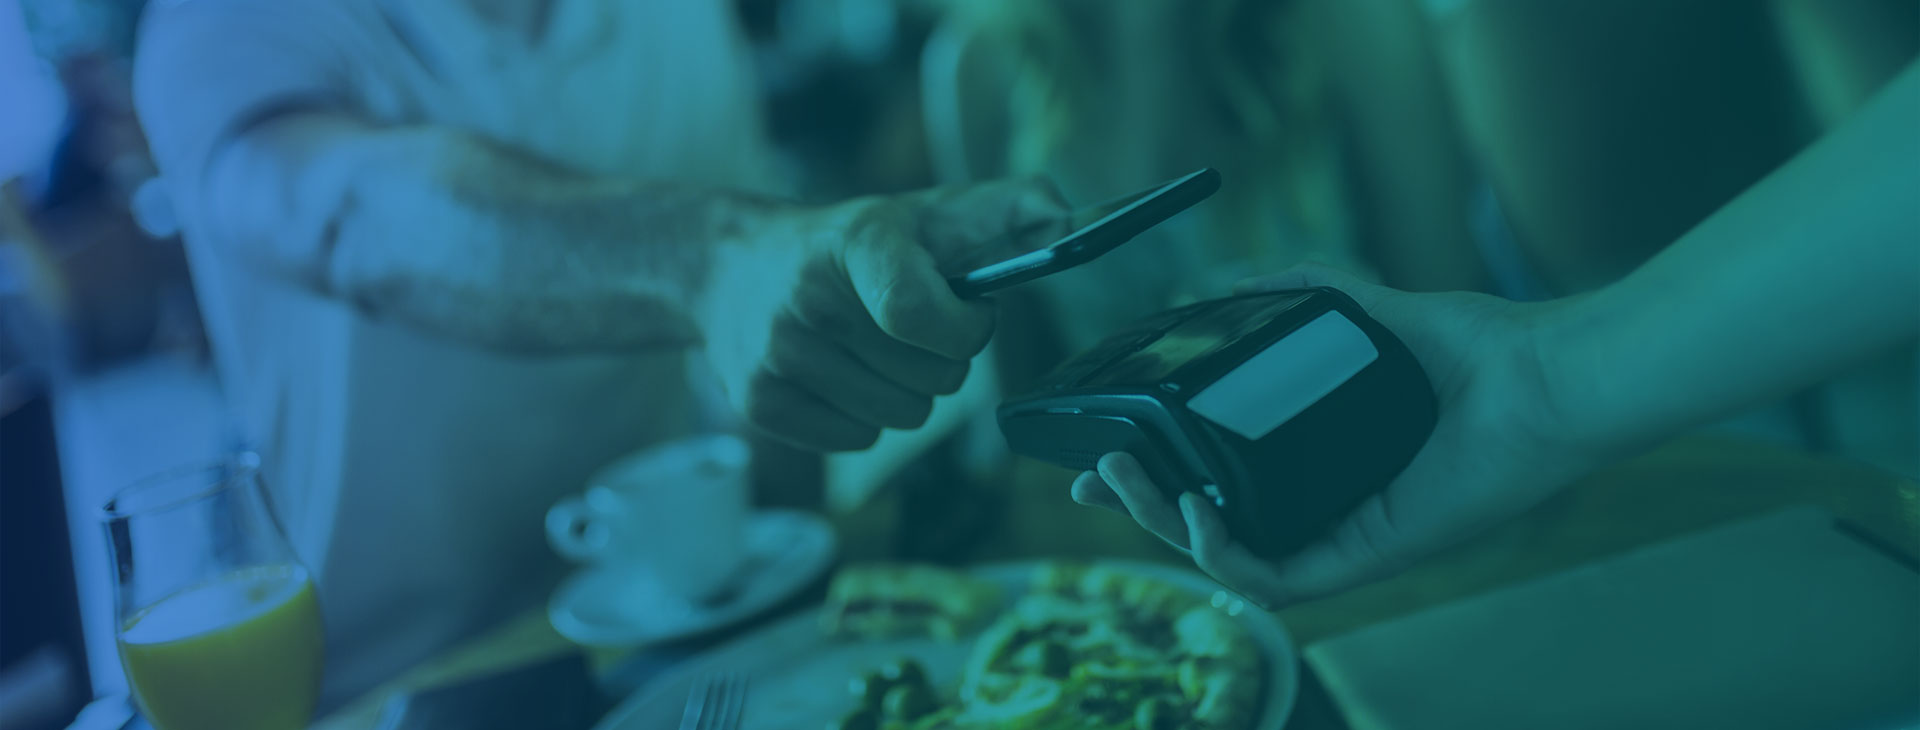 Restaurant Uses Ingenico Terminals for Flexible Payments